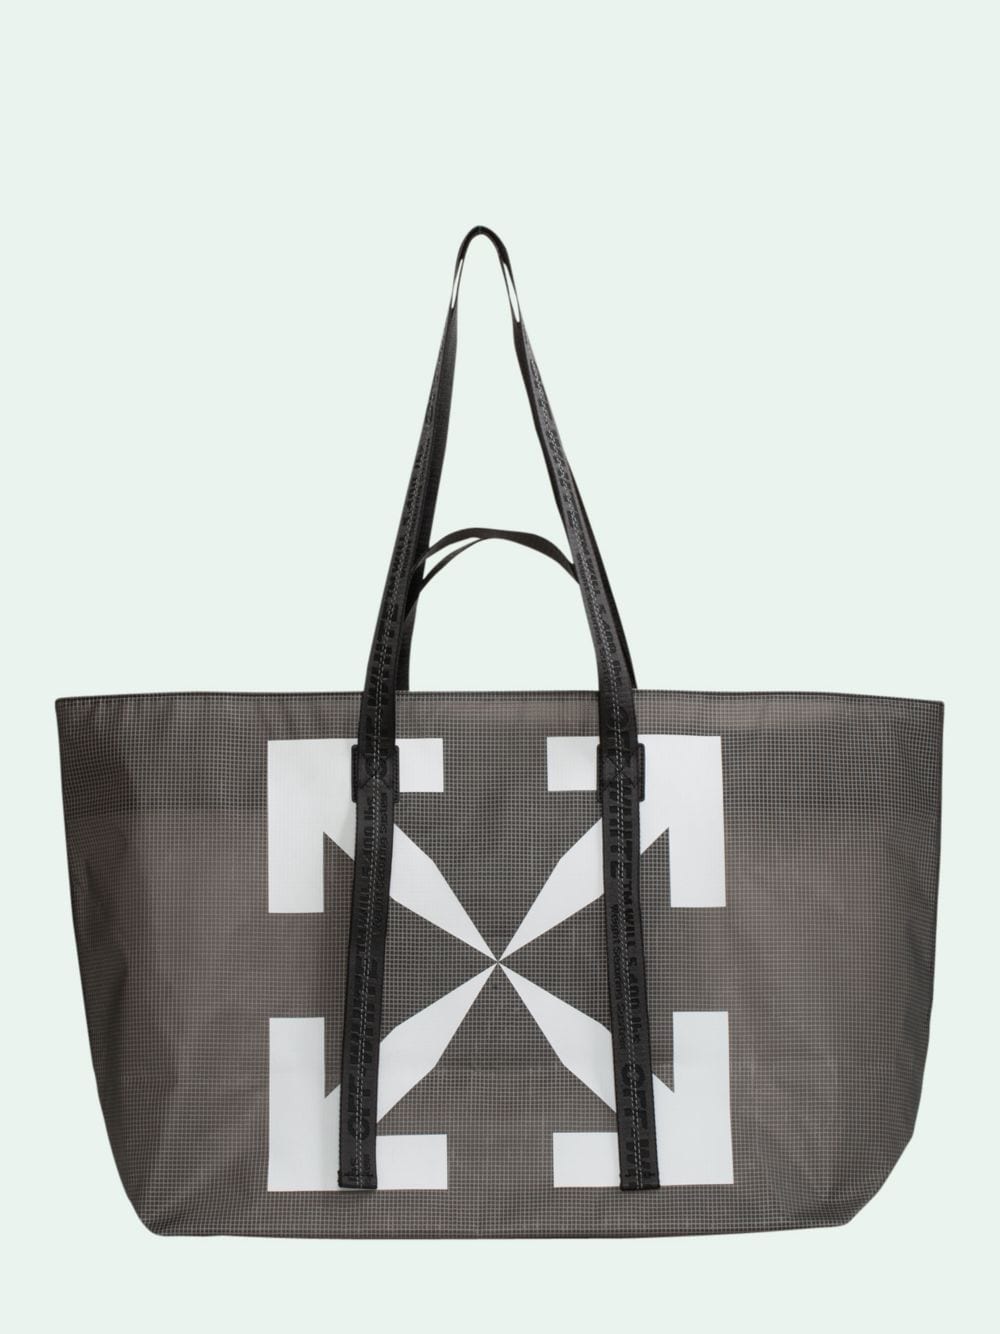 OFF-WHITE Arrows Tote Bag Yellow Black in Polyethylene with Silver